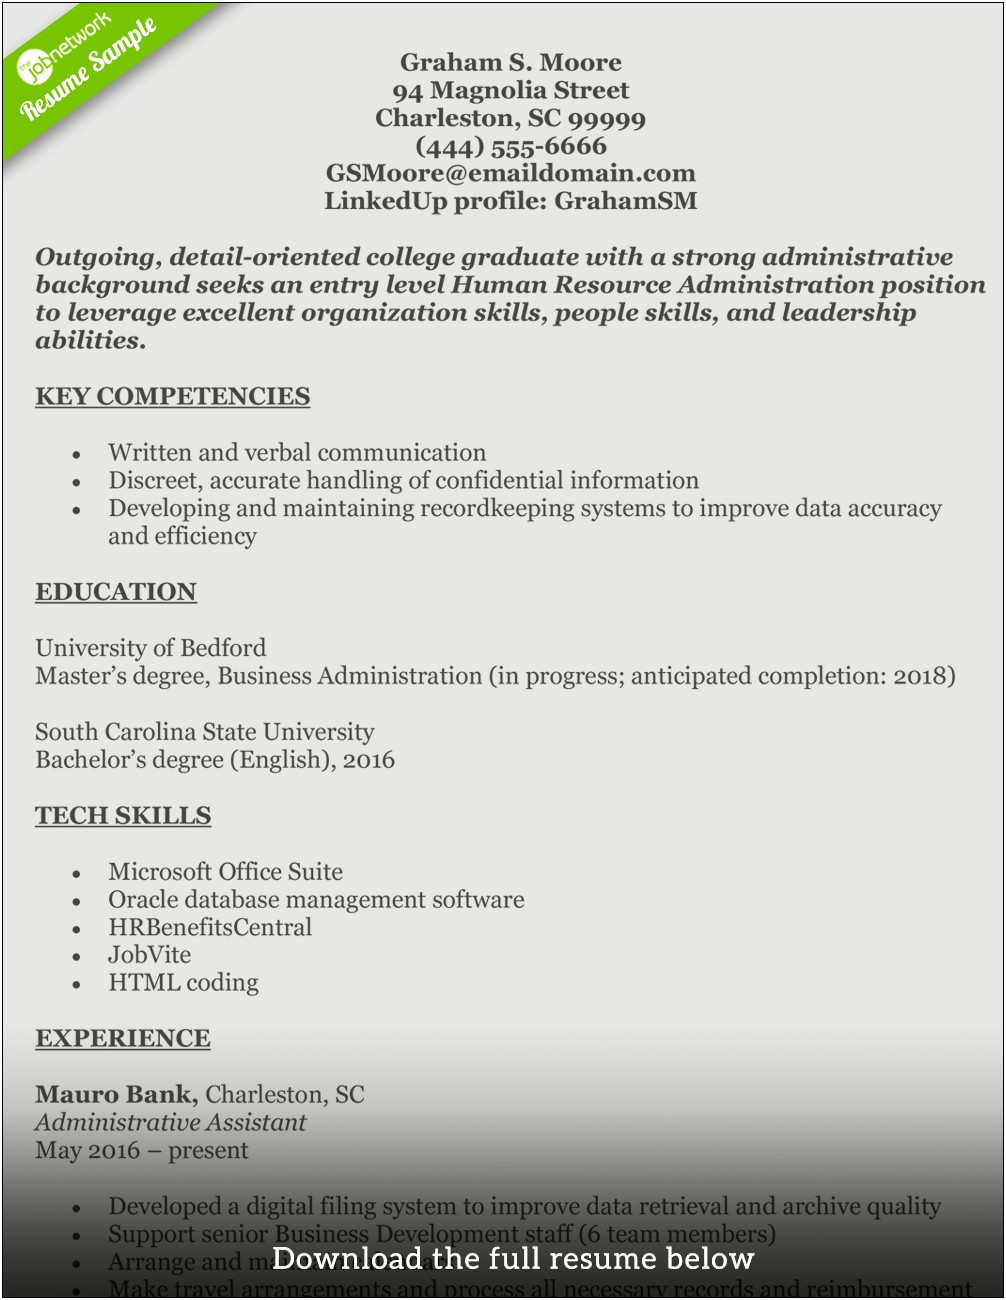 Resume Template For Human Resources Assistant